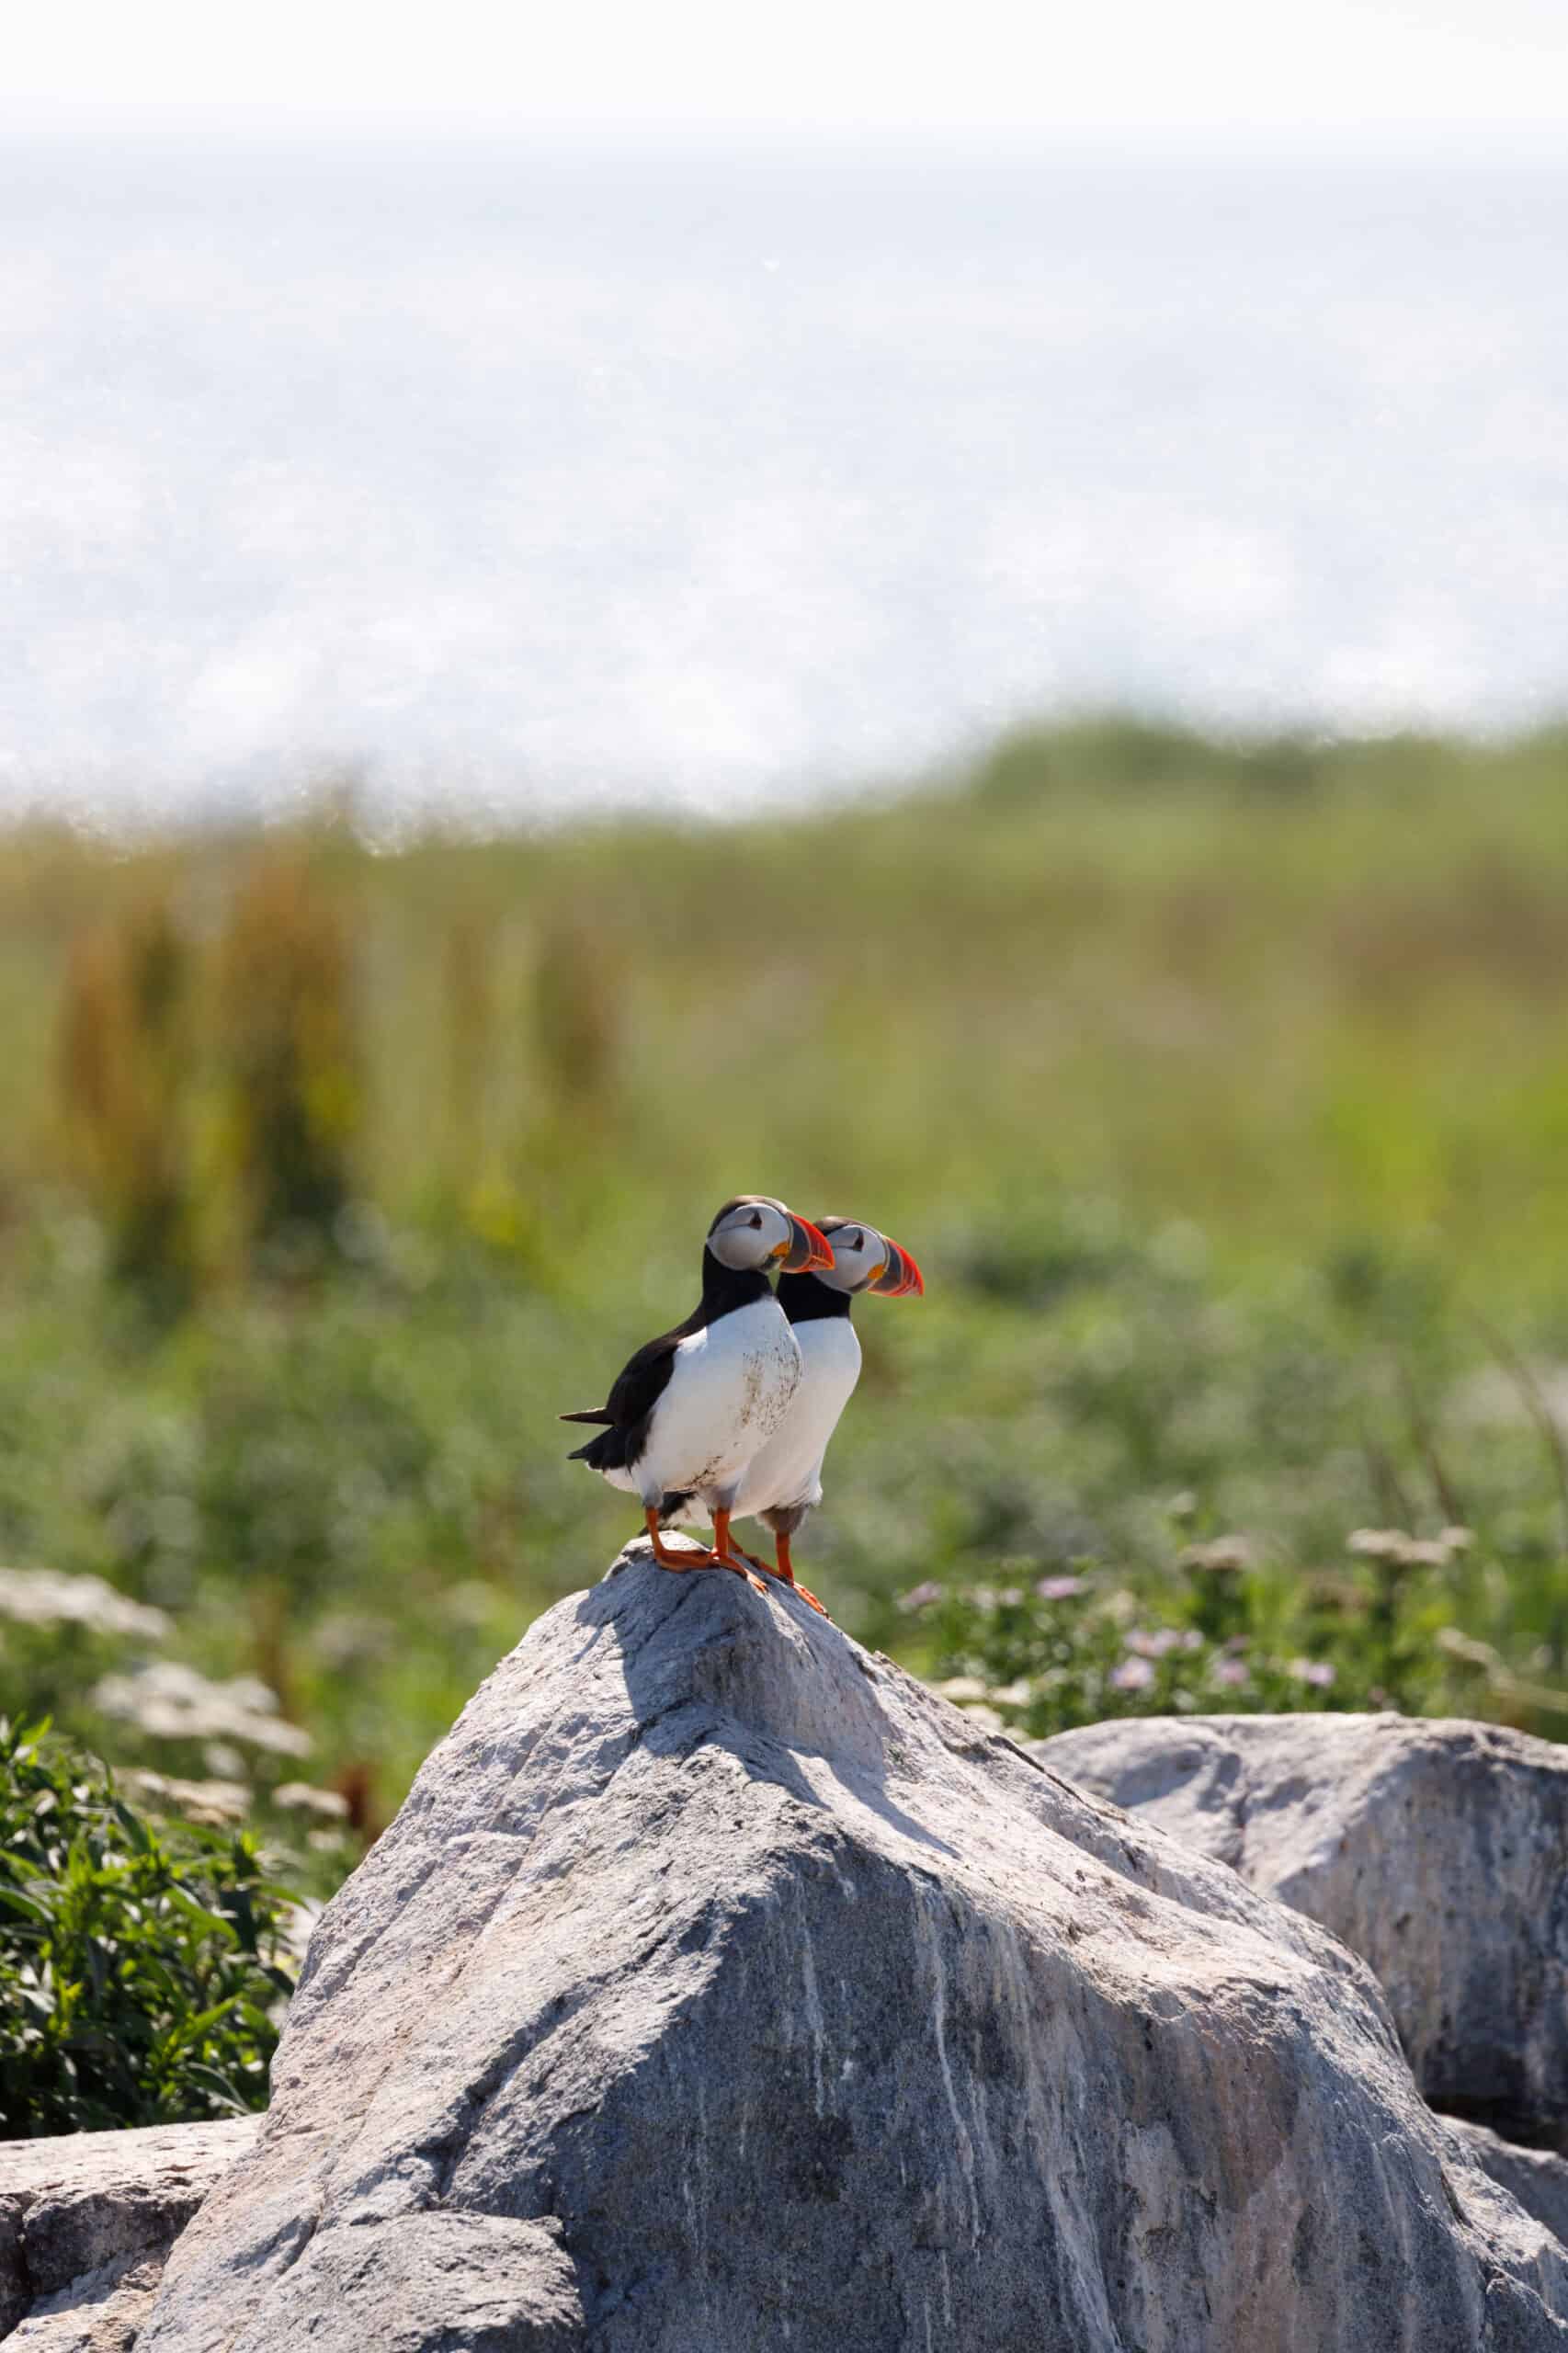 Two puffins perched on a sunny rock in Maine, the background is blurry but is greenery with a pale blue sky